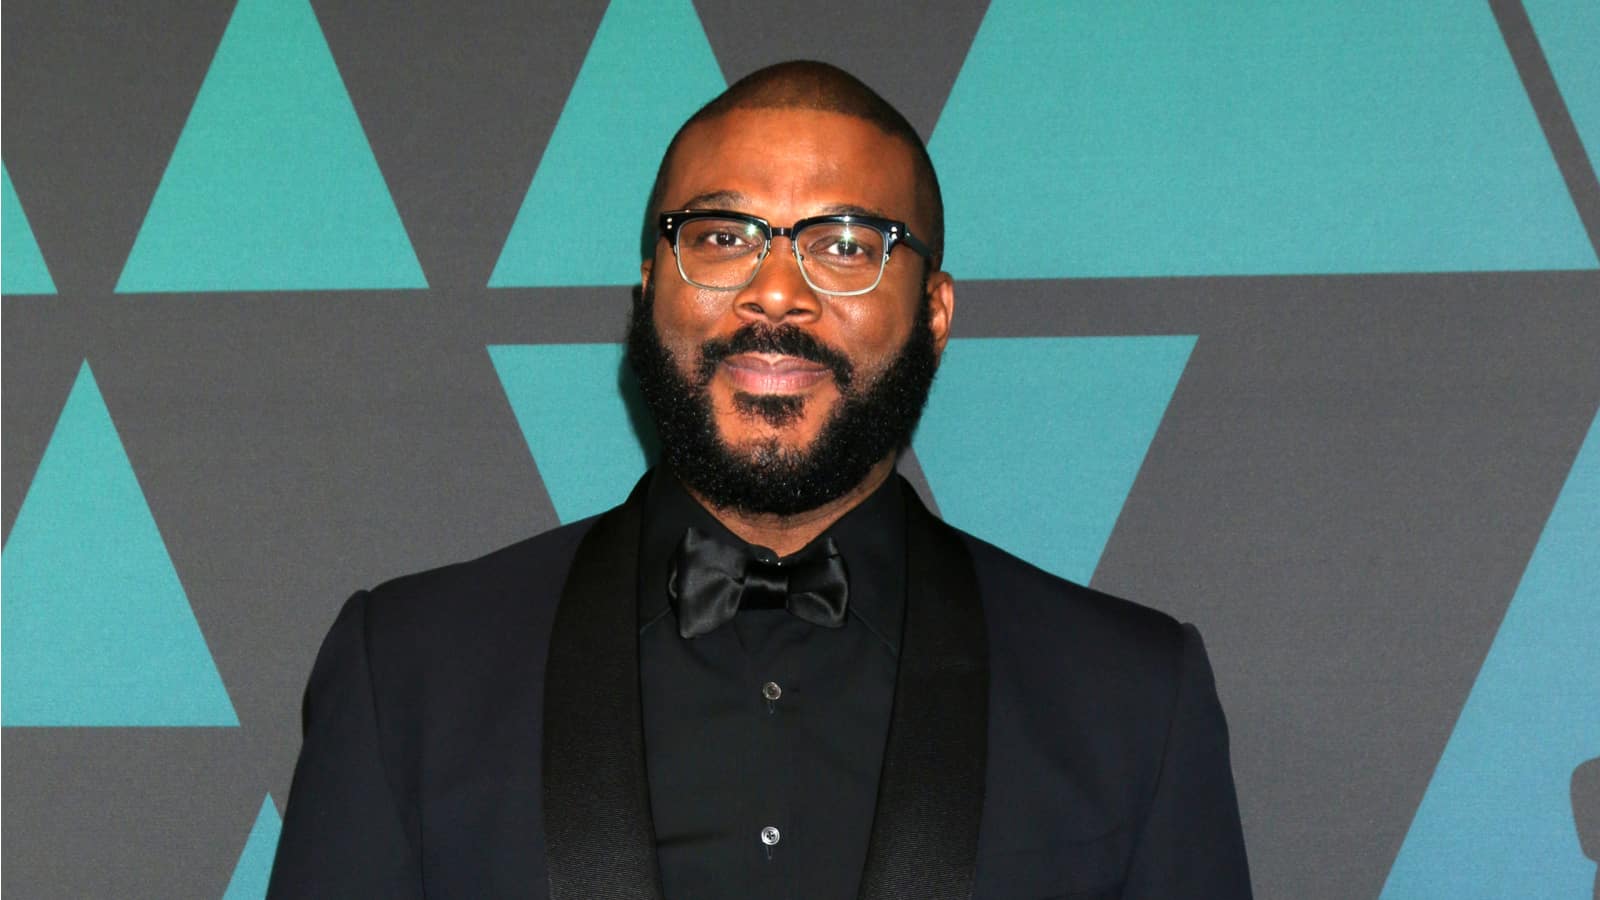 LOS ANGELES - NOV 18: Tyler Perry at the 10th Annual Governors Awards at the Ray Dolby Ballroom on November 18, 2018 in Los Angeles, CA